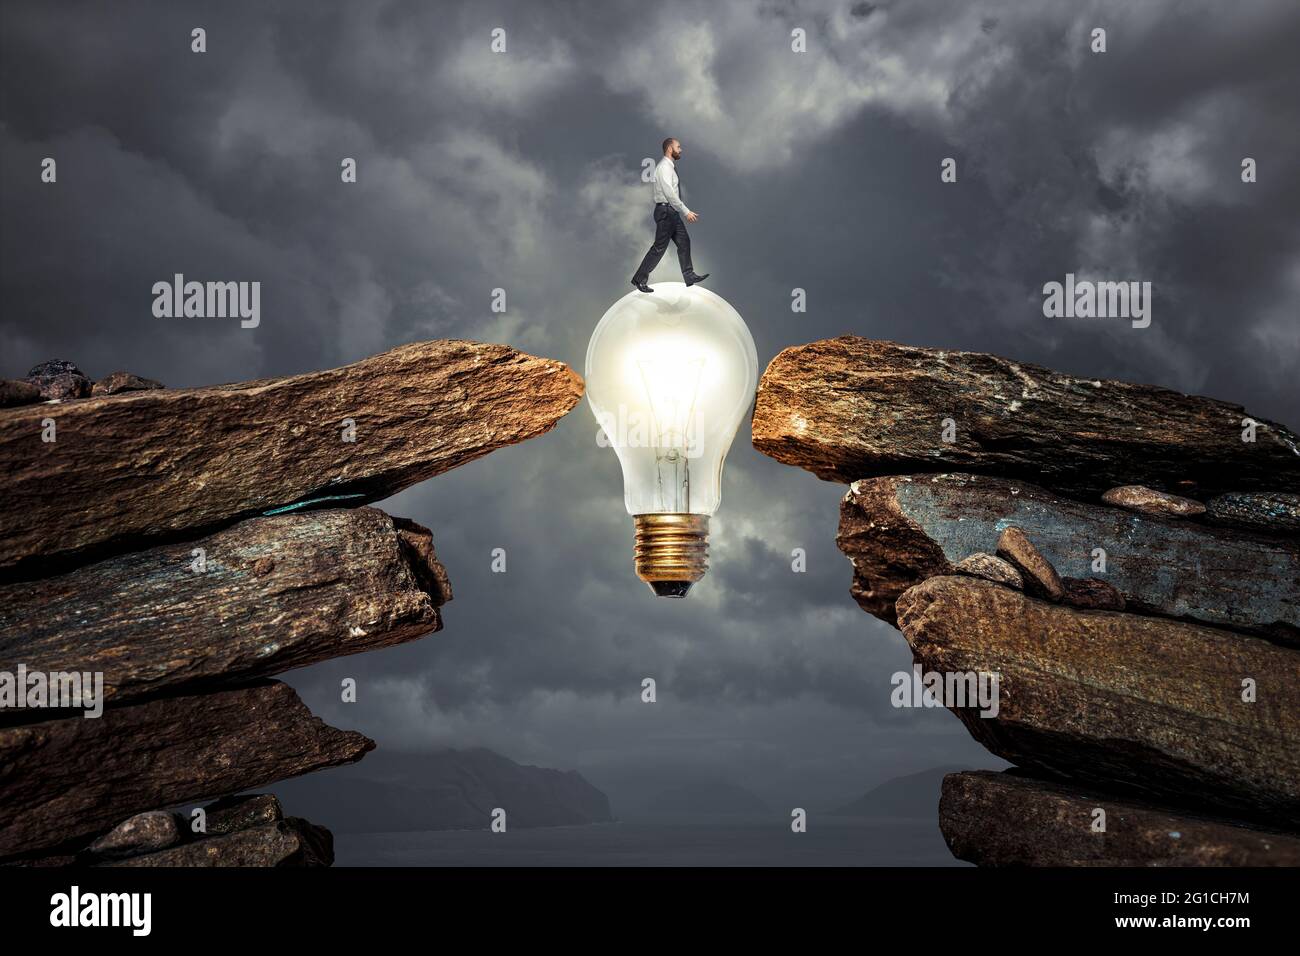 man crossing an obstacle thanks to an innovative idea. Stock Photo